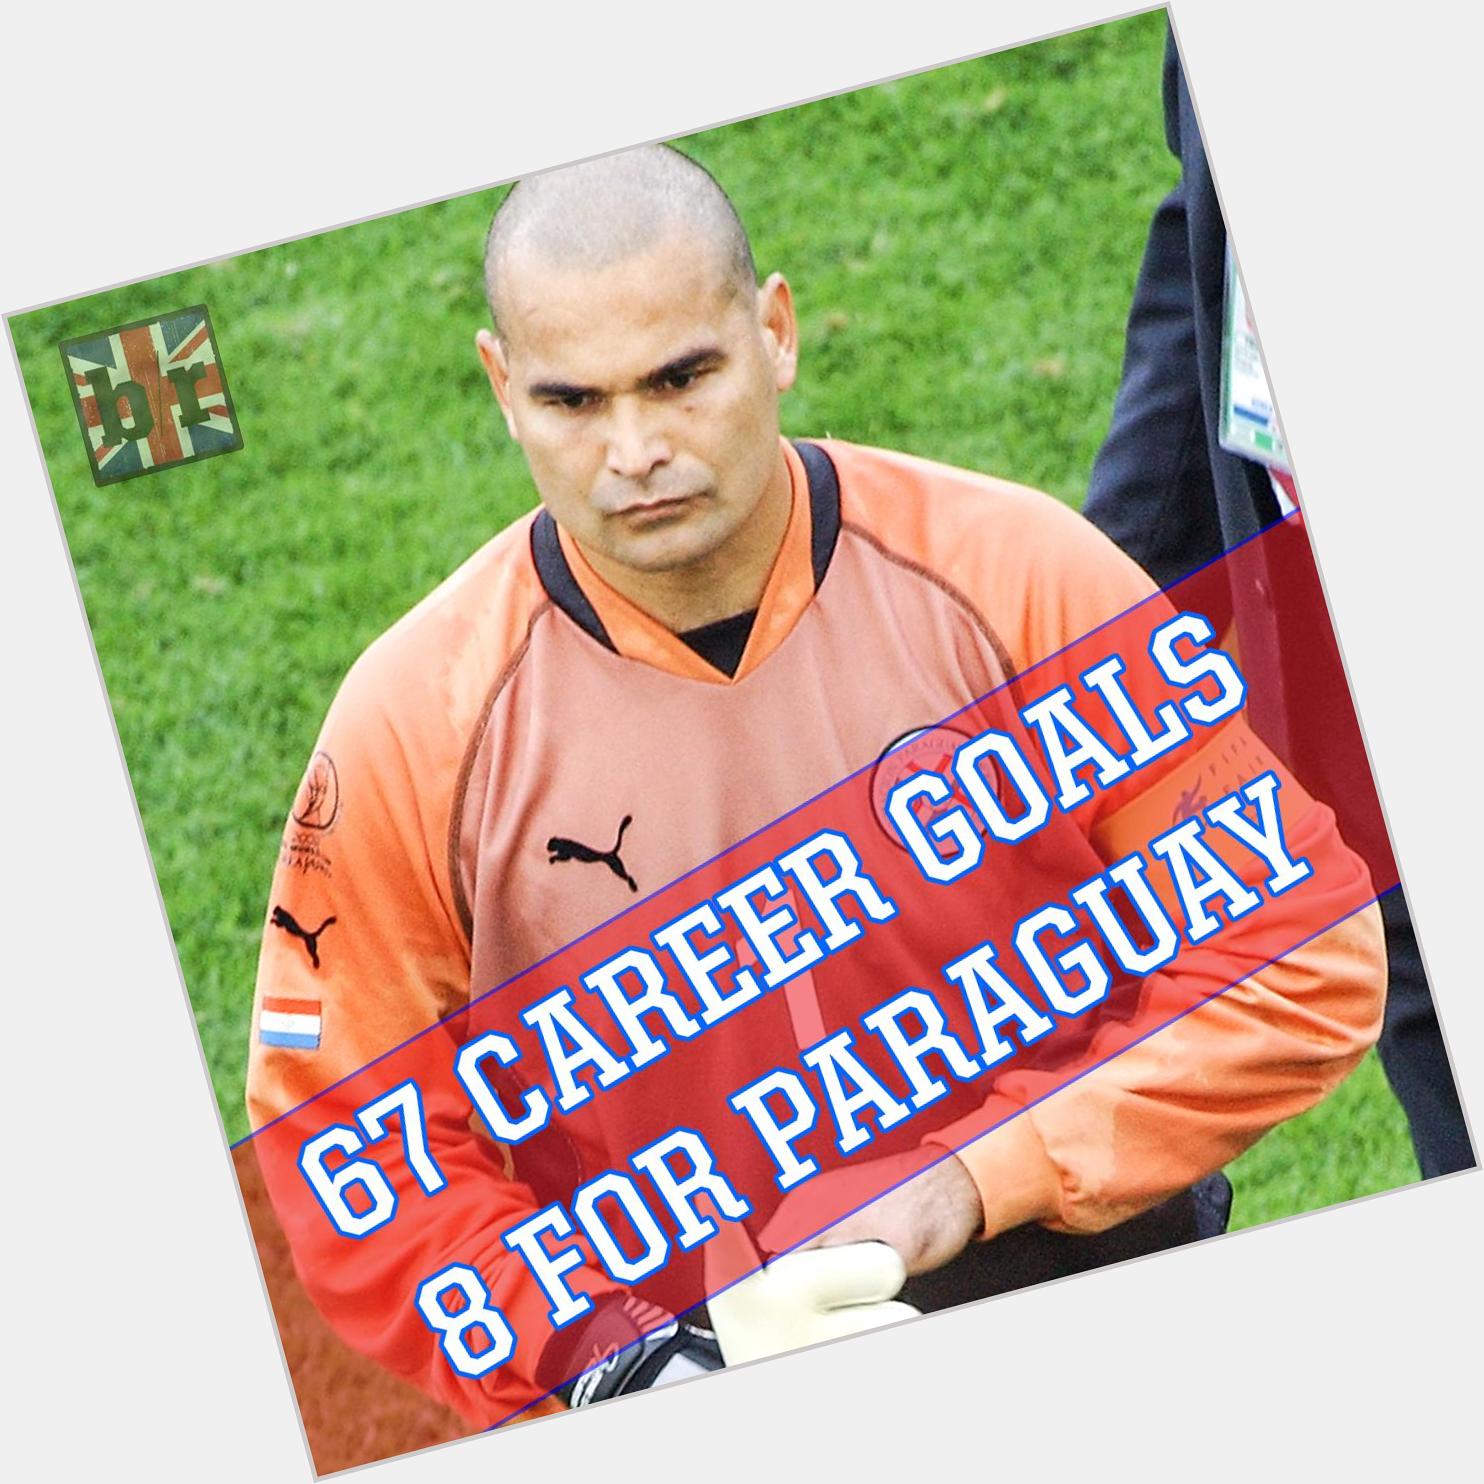 Happy 50th Birthday to one of football s great characters. 

Former Paraguay keeper Jose Luis Chilavert. 